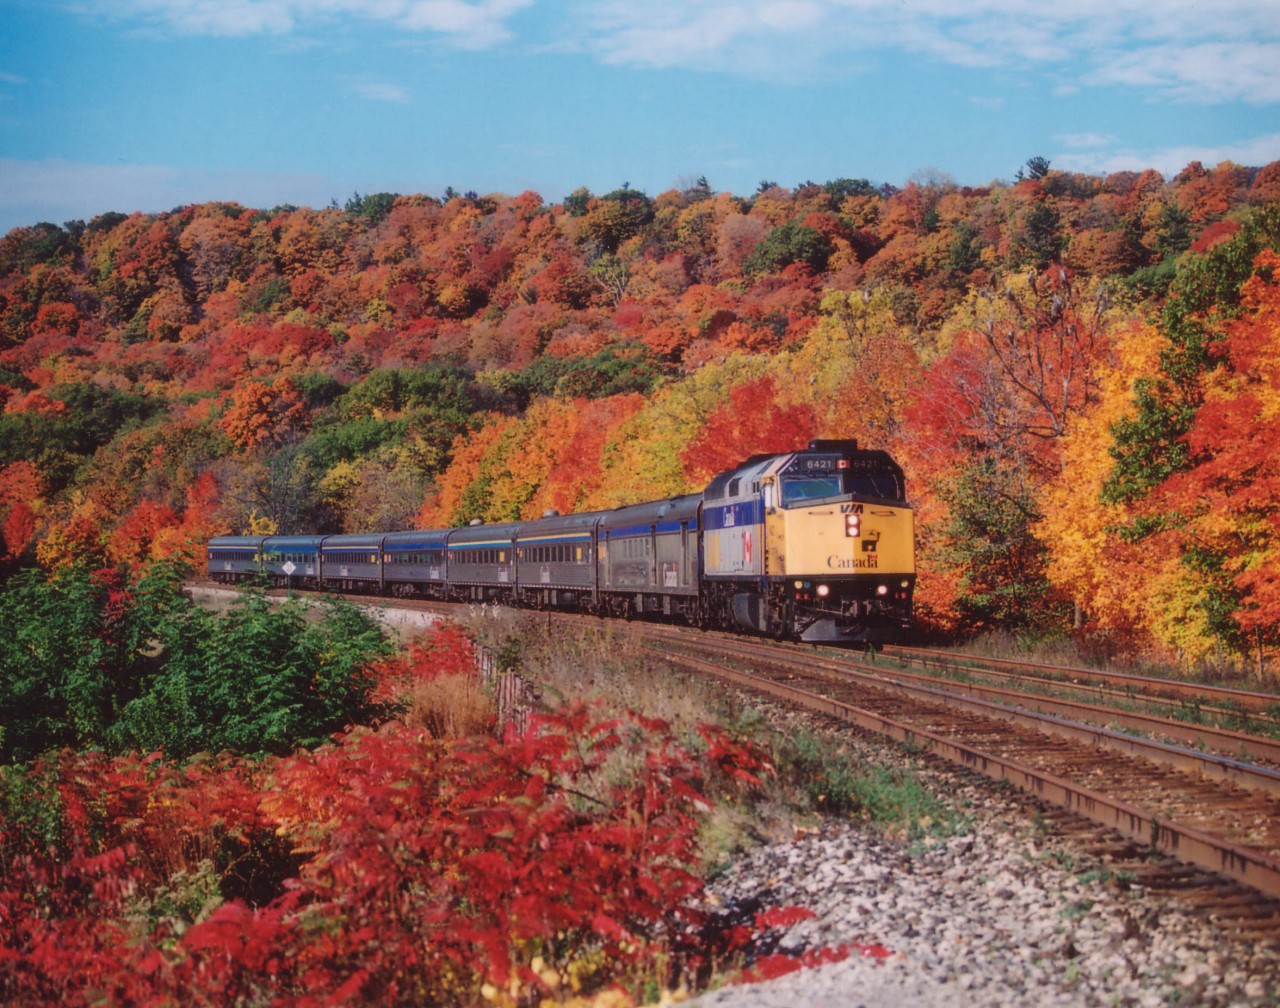 For my money, the fall of 2008 had some of the most brilliant autumn foliage I can ever remember. Case in point is this snazzy scene along the CN Dundas sub as VIA #70 with 6421 leader approaches bridge over York Rd. Date is October 15, 2008, time approximately 0925. The area is now mostly overgrown and is a much tighter shot than back then.